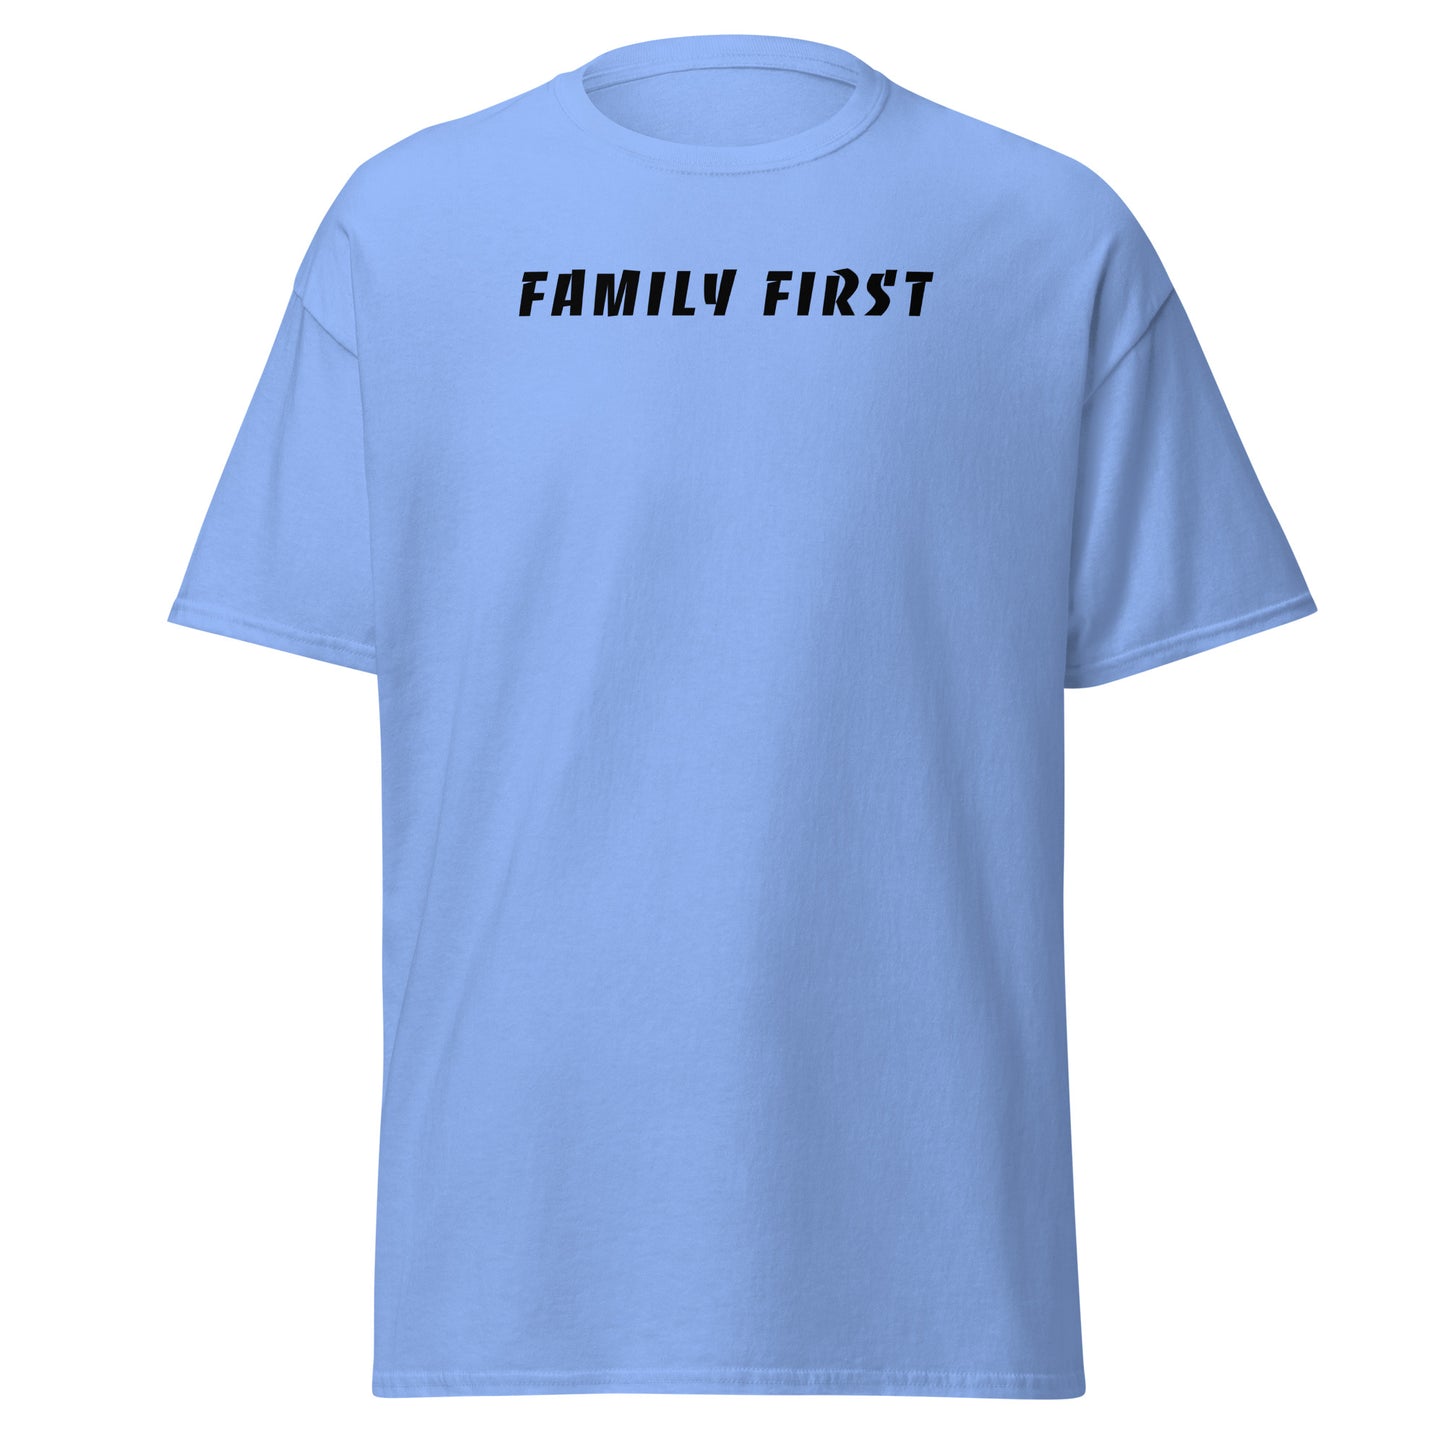 Honor Bound Gear "Family First" Men's T-Shirt